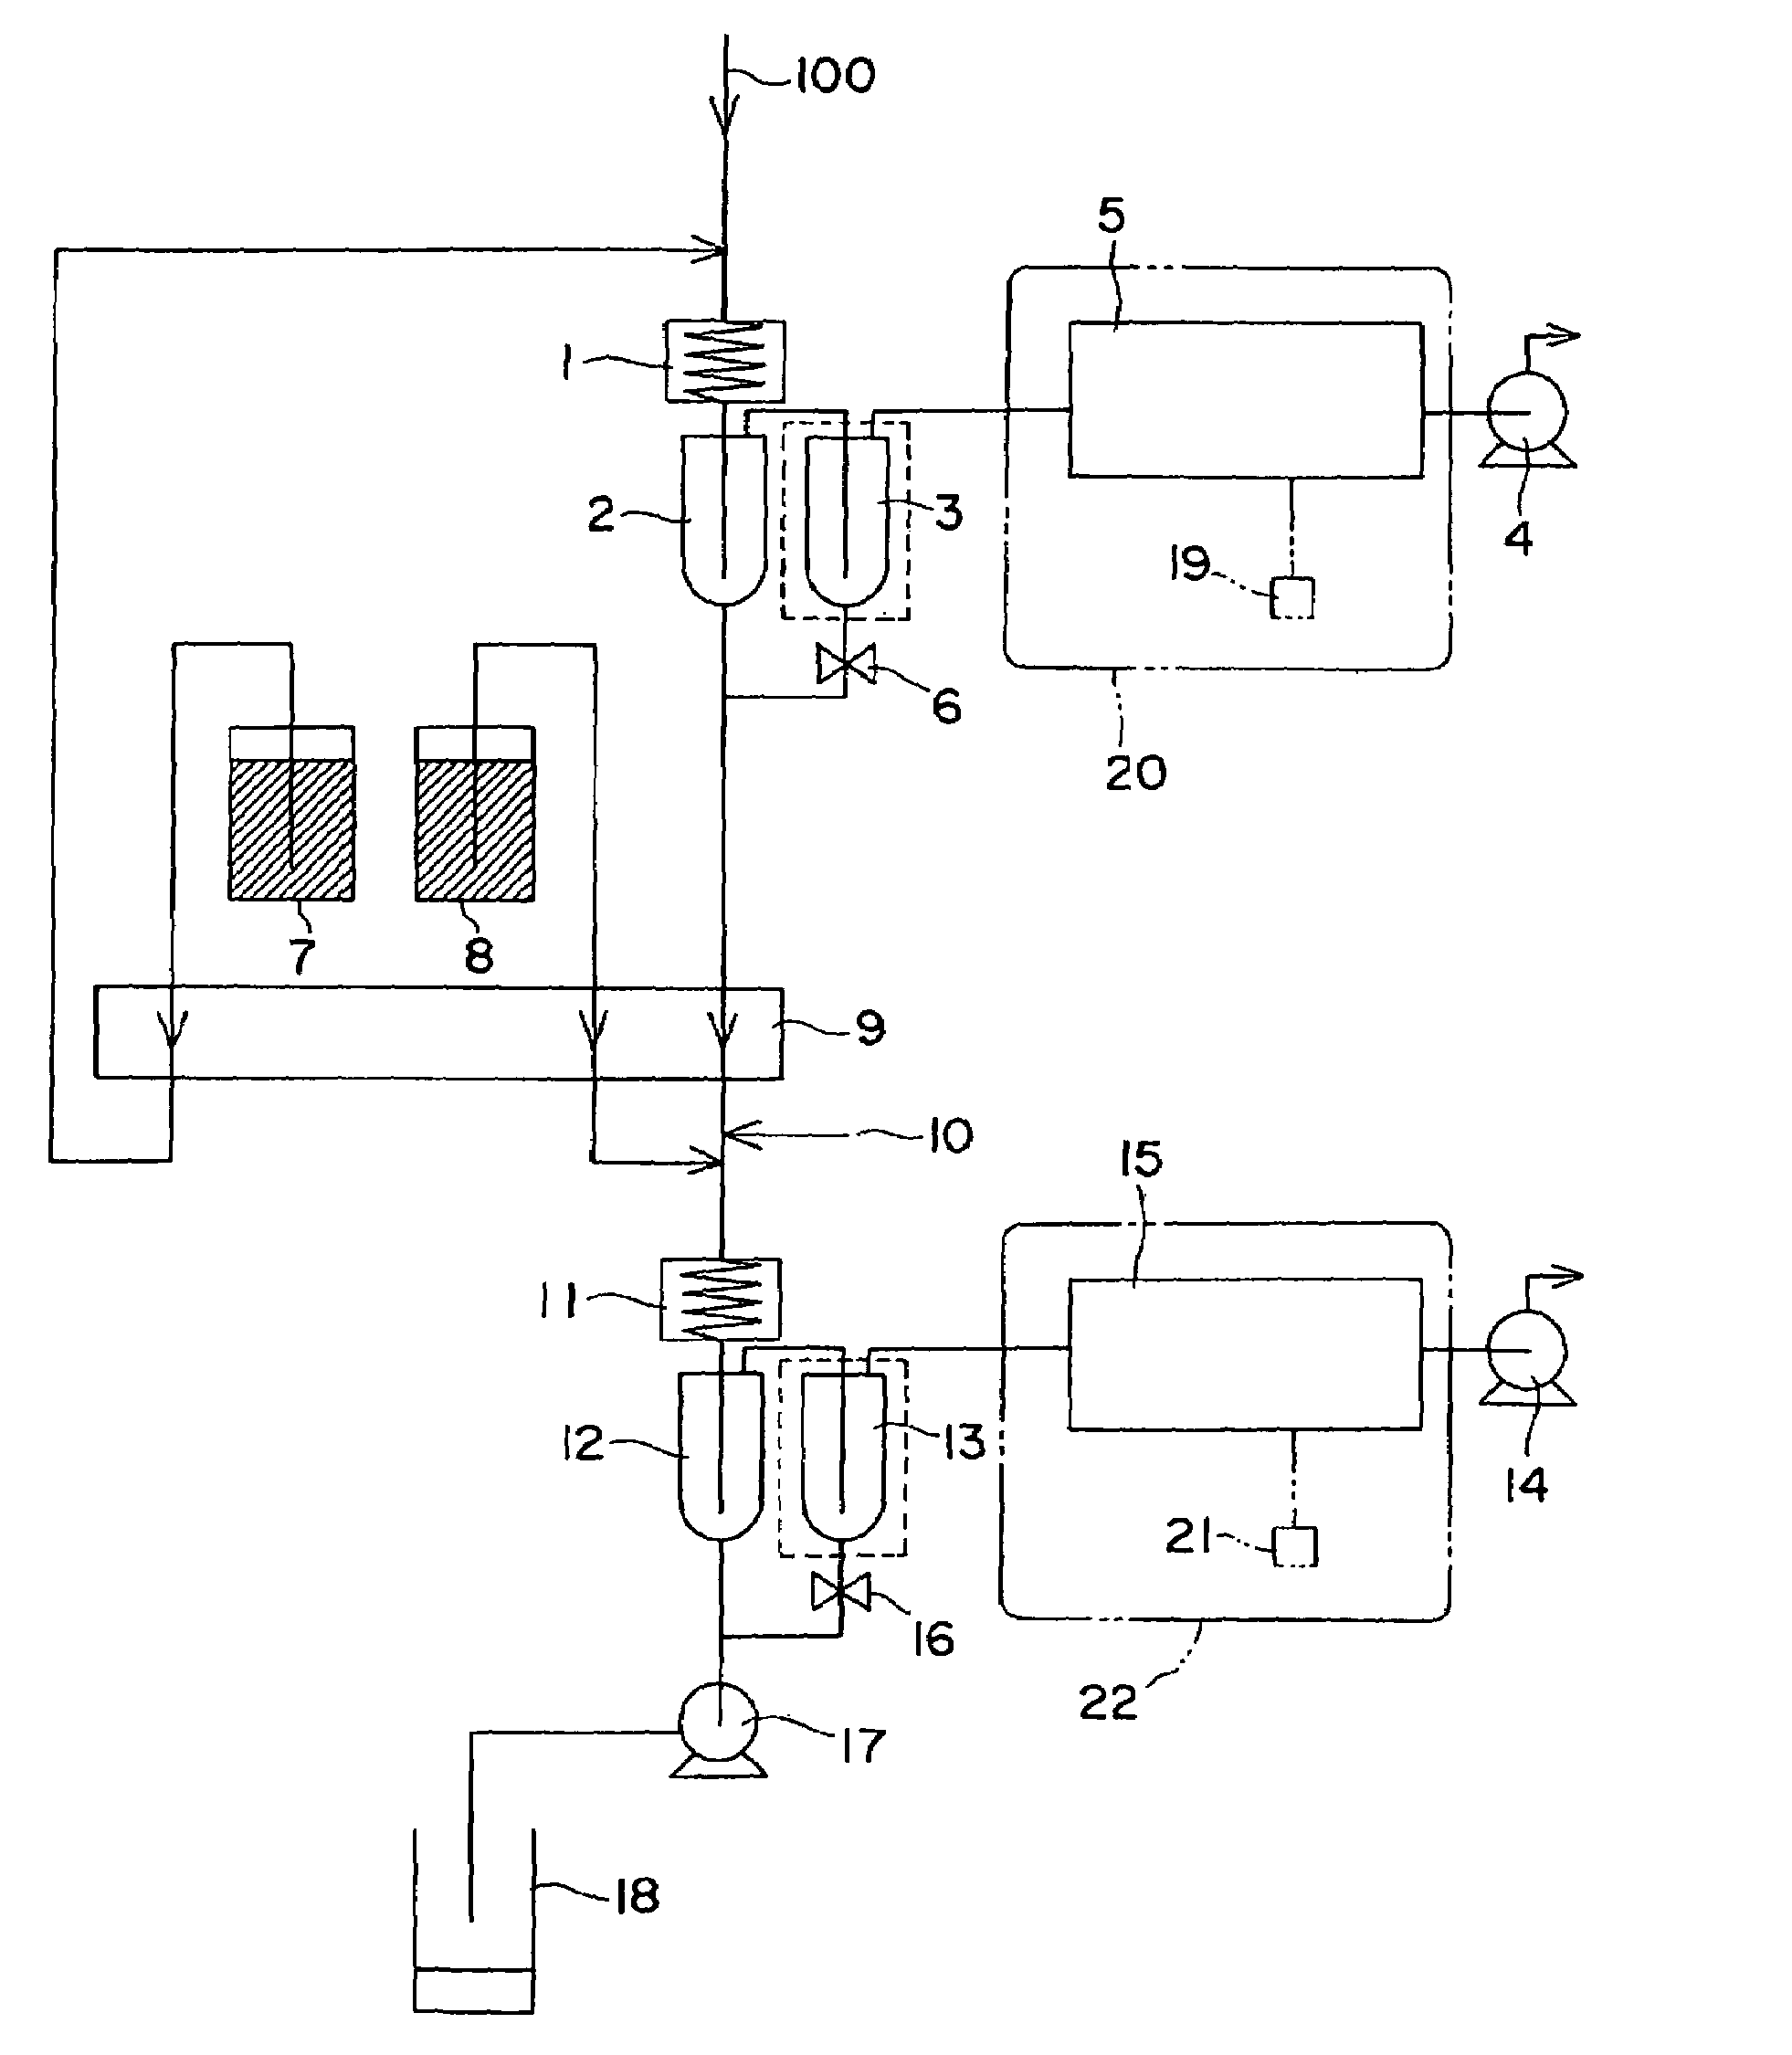 Method and apparatus for continuous fractional analysis of metallic mercury and water-soluble mercury in a gas